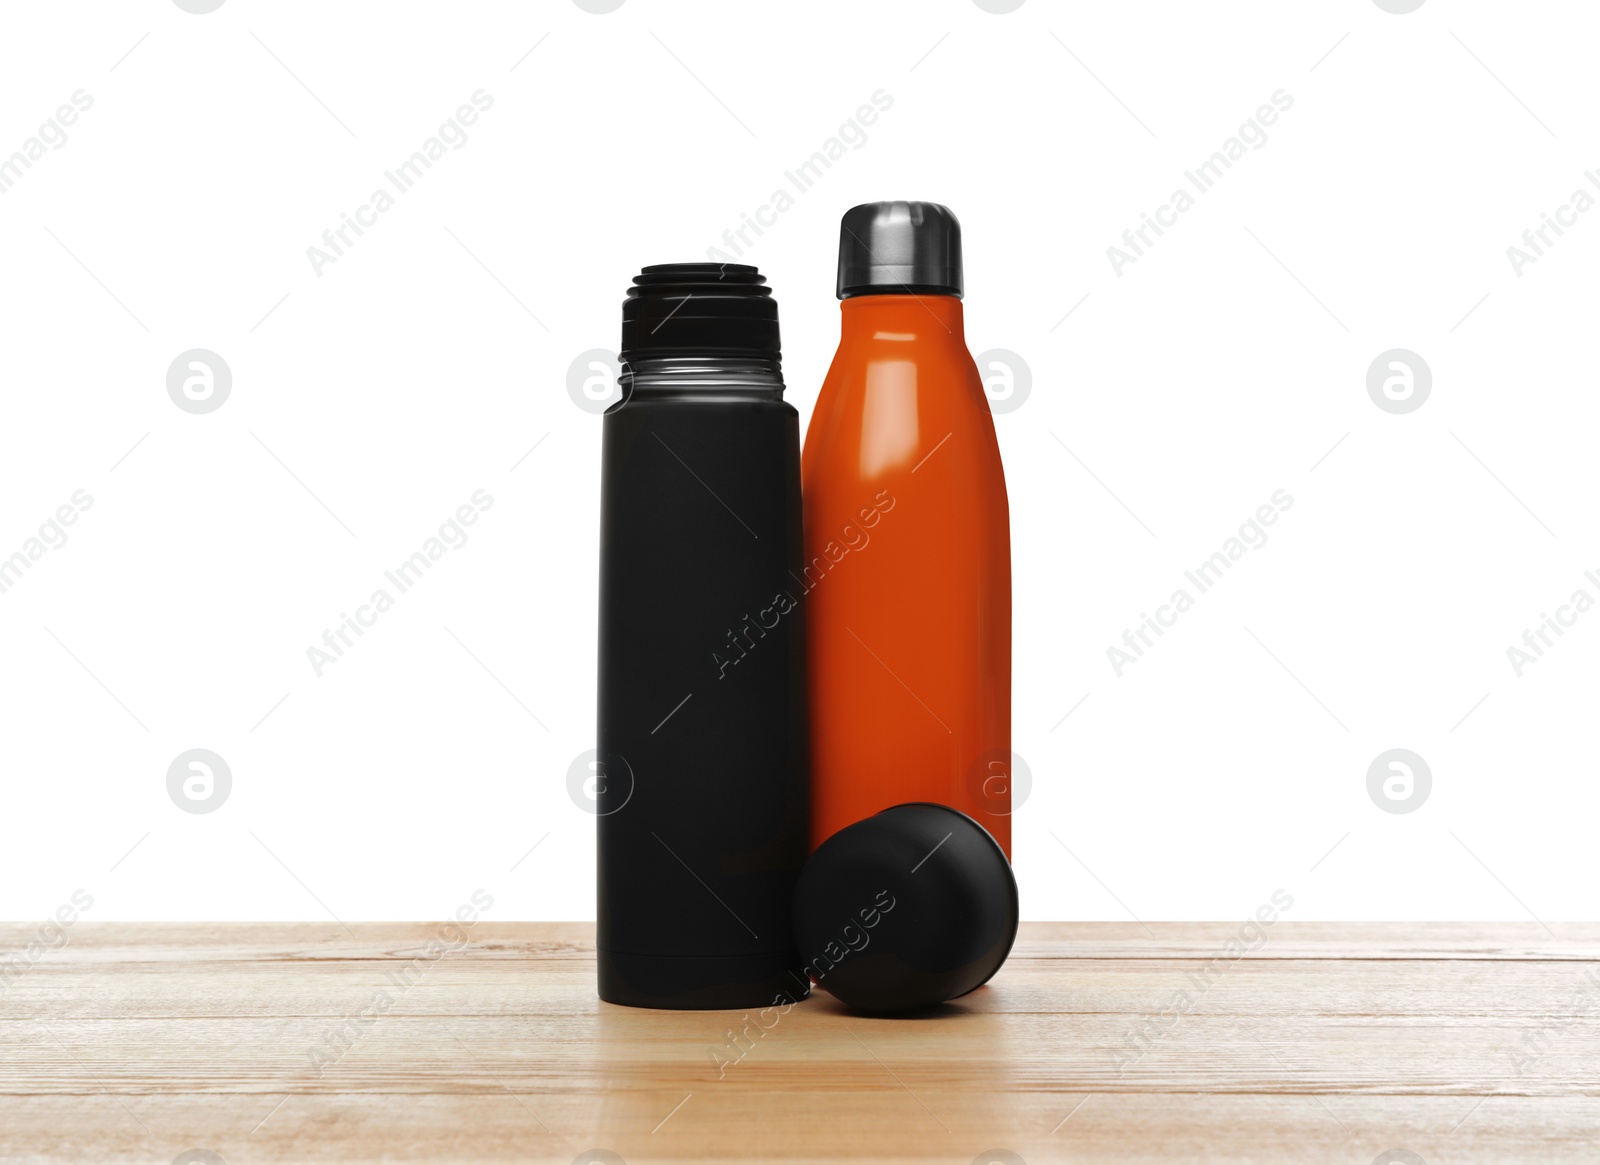 Photo of Stylish thermo bottles on wooden table against white background